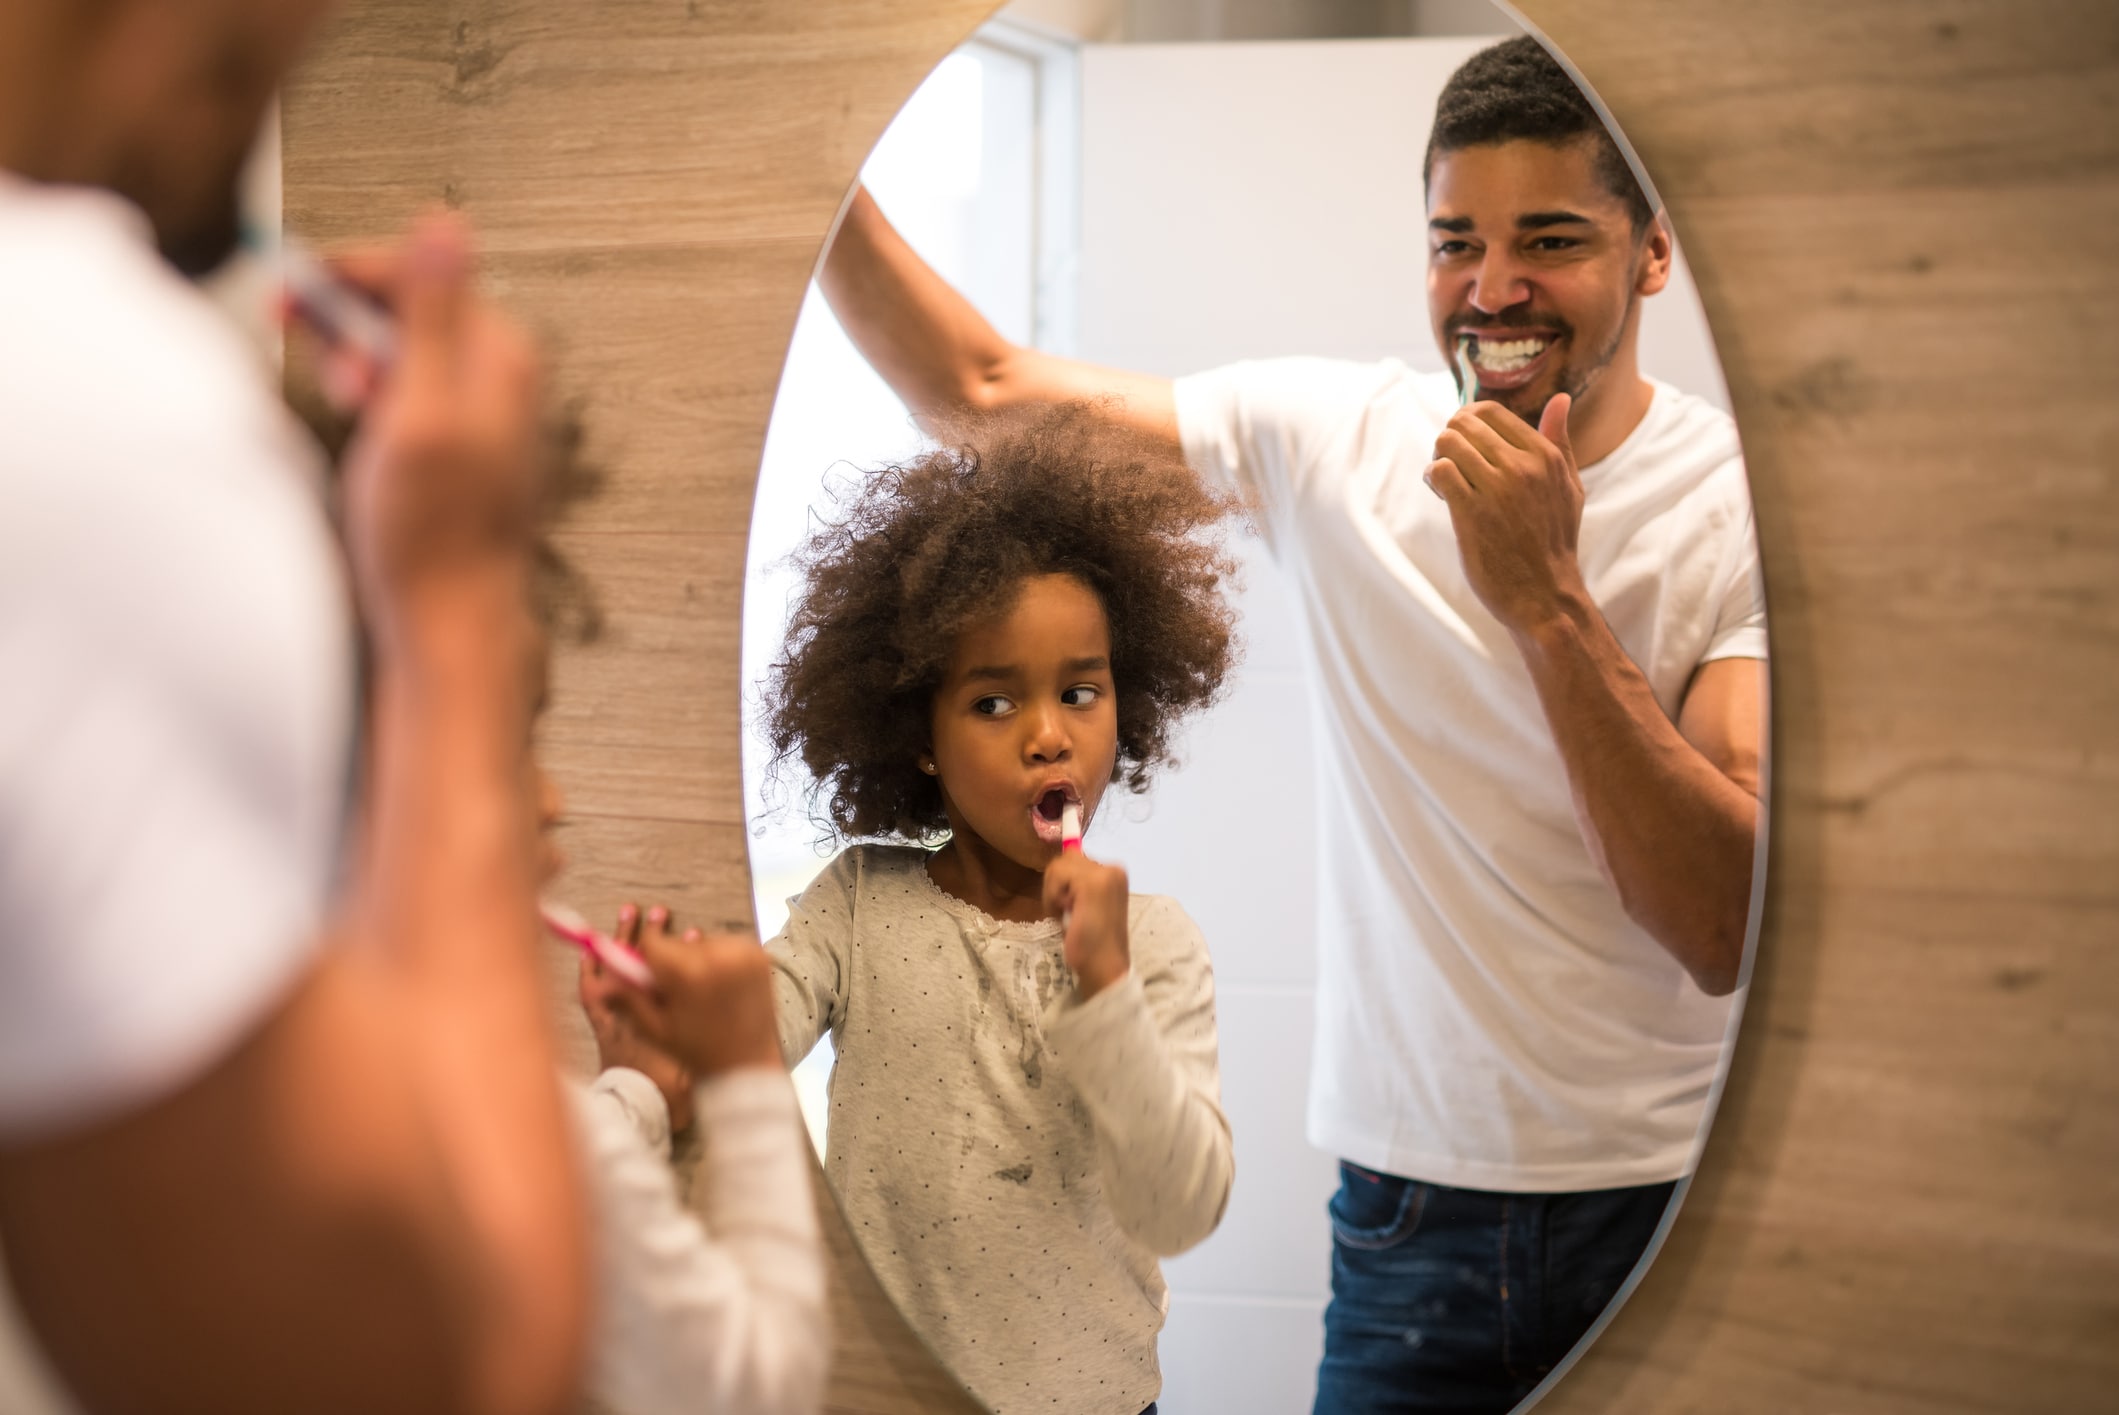 dad and daughter brushing teeth together in the bathroom mirror